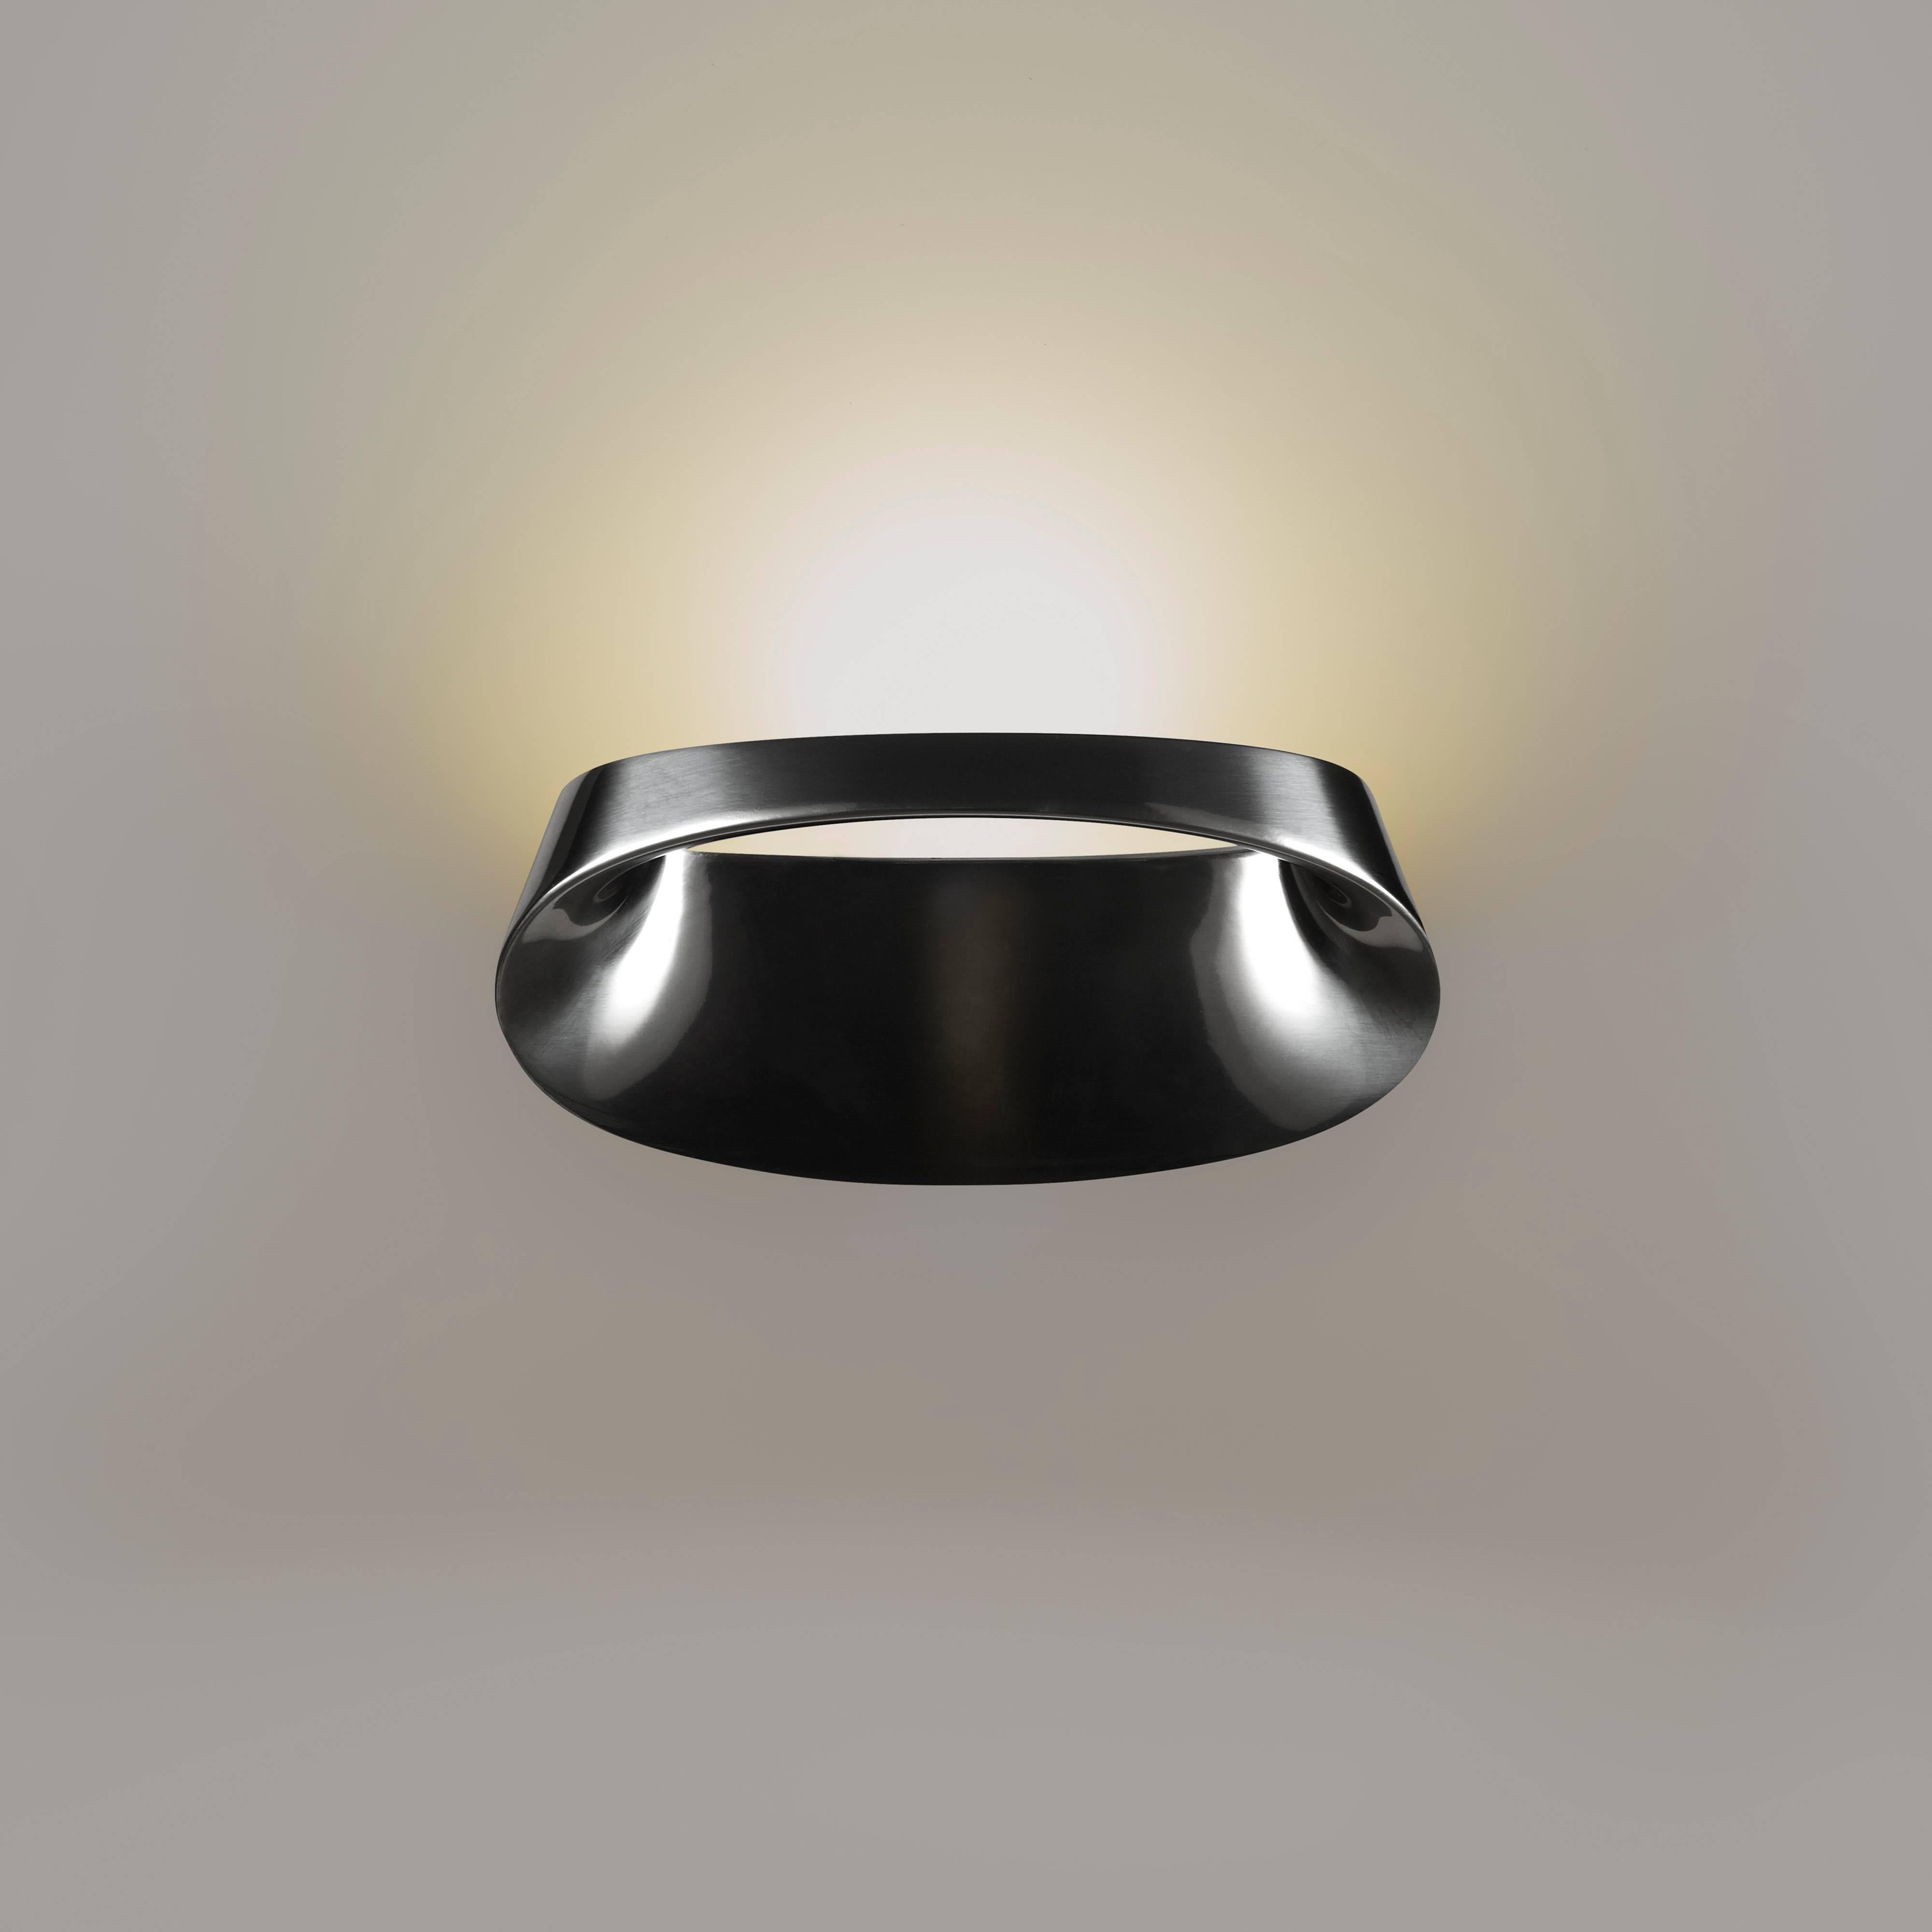 Manufactured in 2017 by Fontana Arte and designed by Odo Fioravanti in 2014, the Bonnet wall lamp in polished aluminum reworks the concept of indirect lighting. The top part conceals a small yet very powerful Led source whose ray of light is mainly